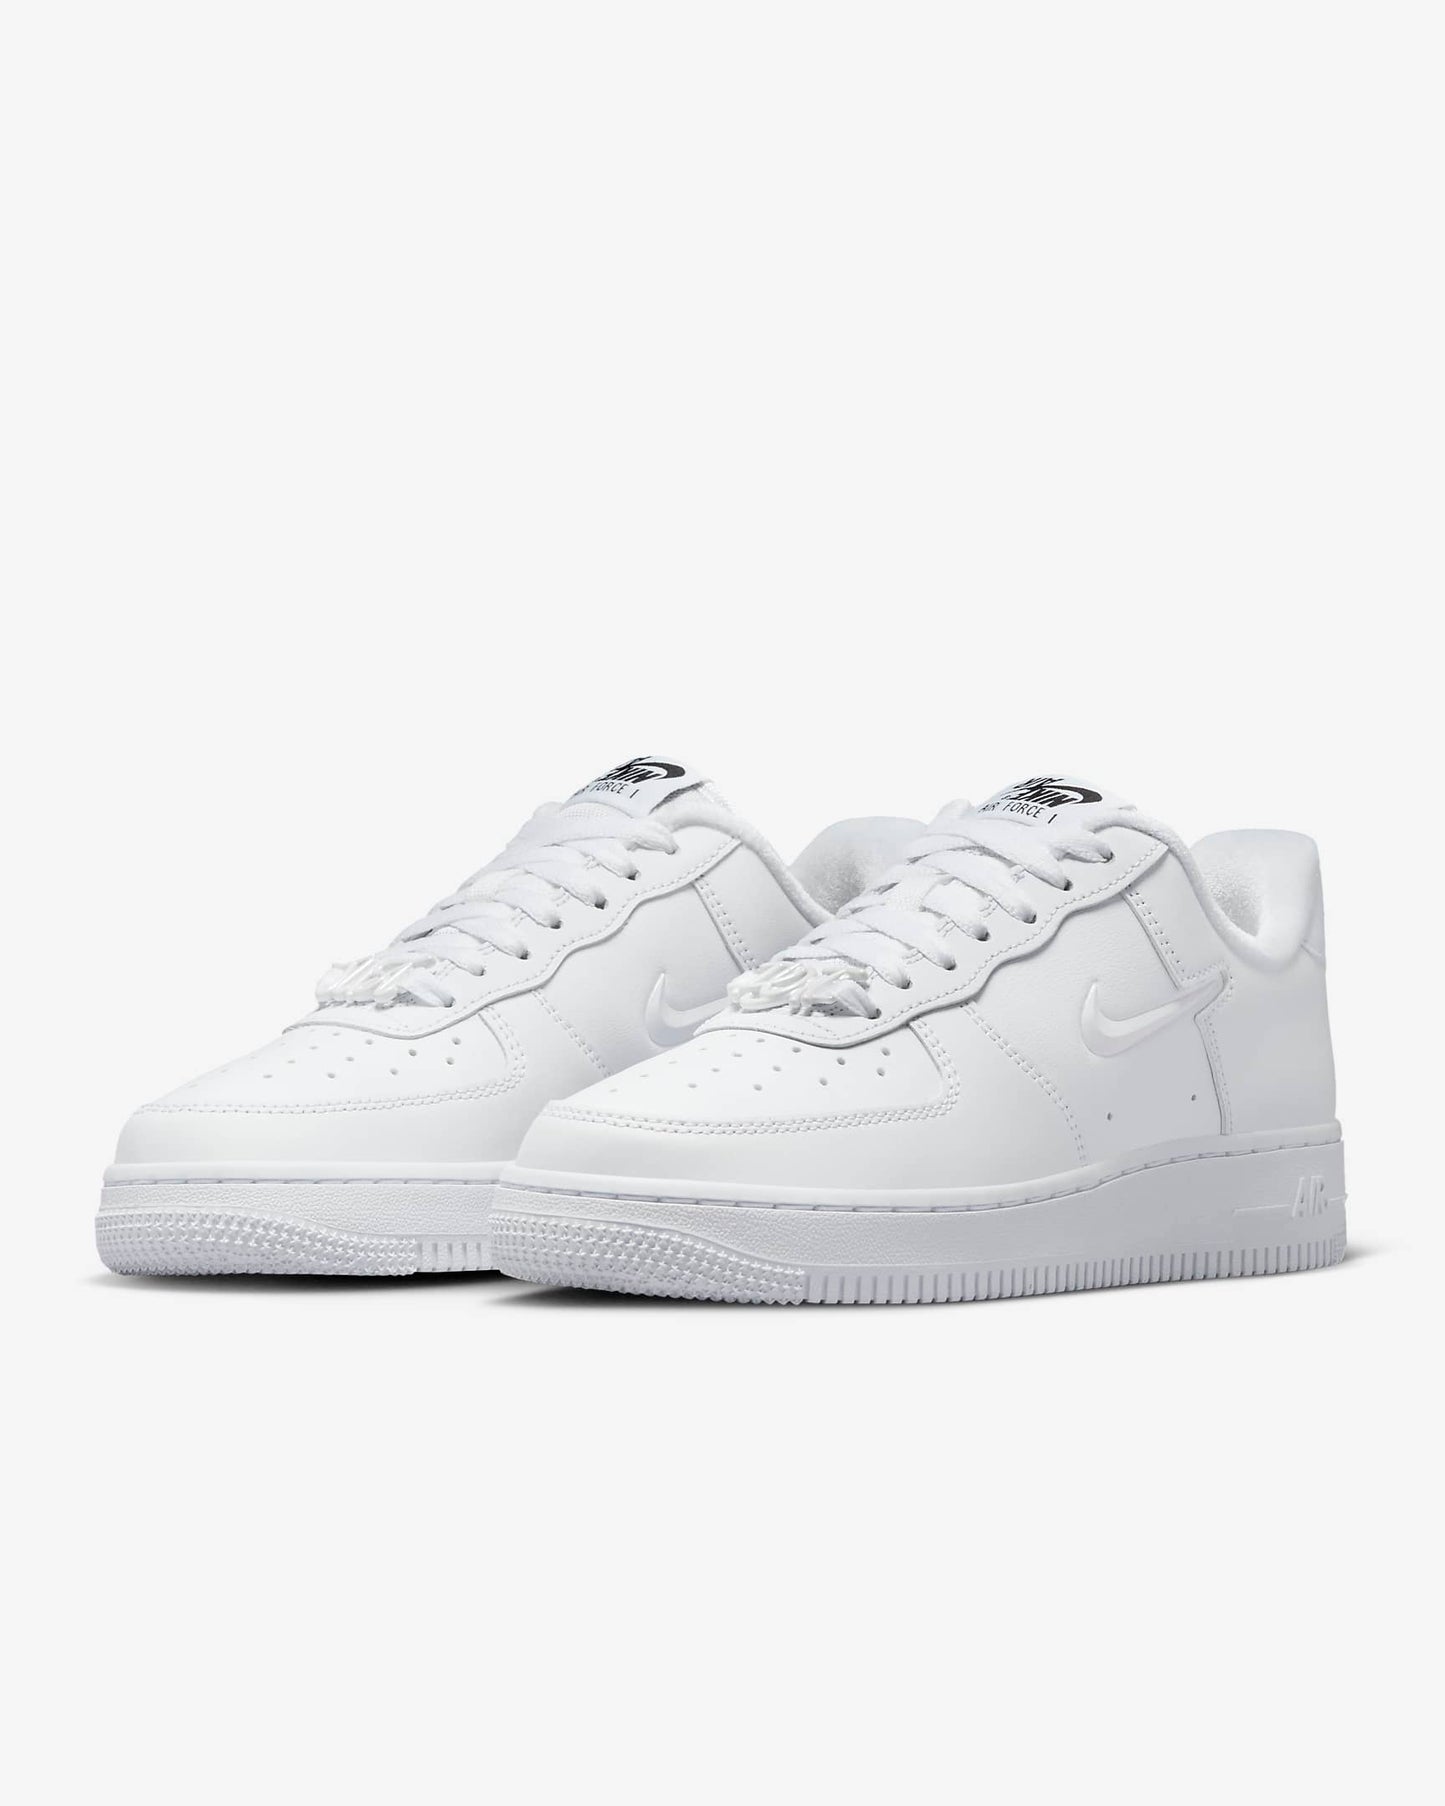 Nike Air Force 1 '07 Women's Shoes, White/Black/Multi-Color